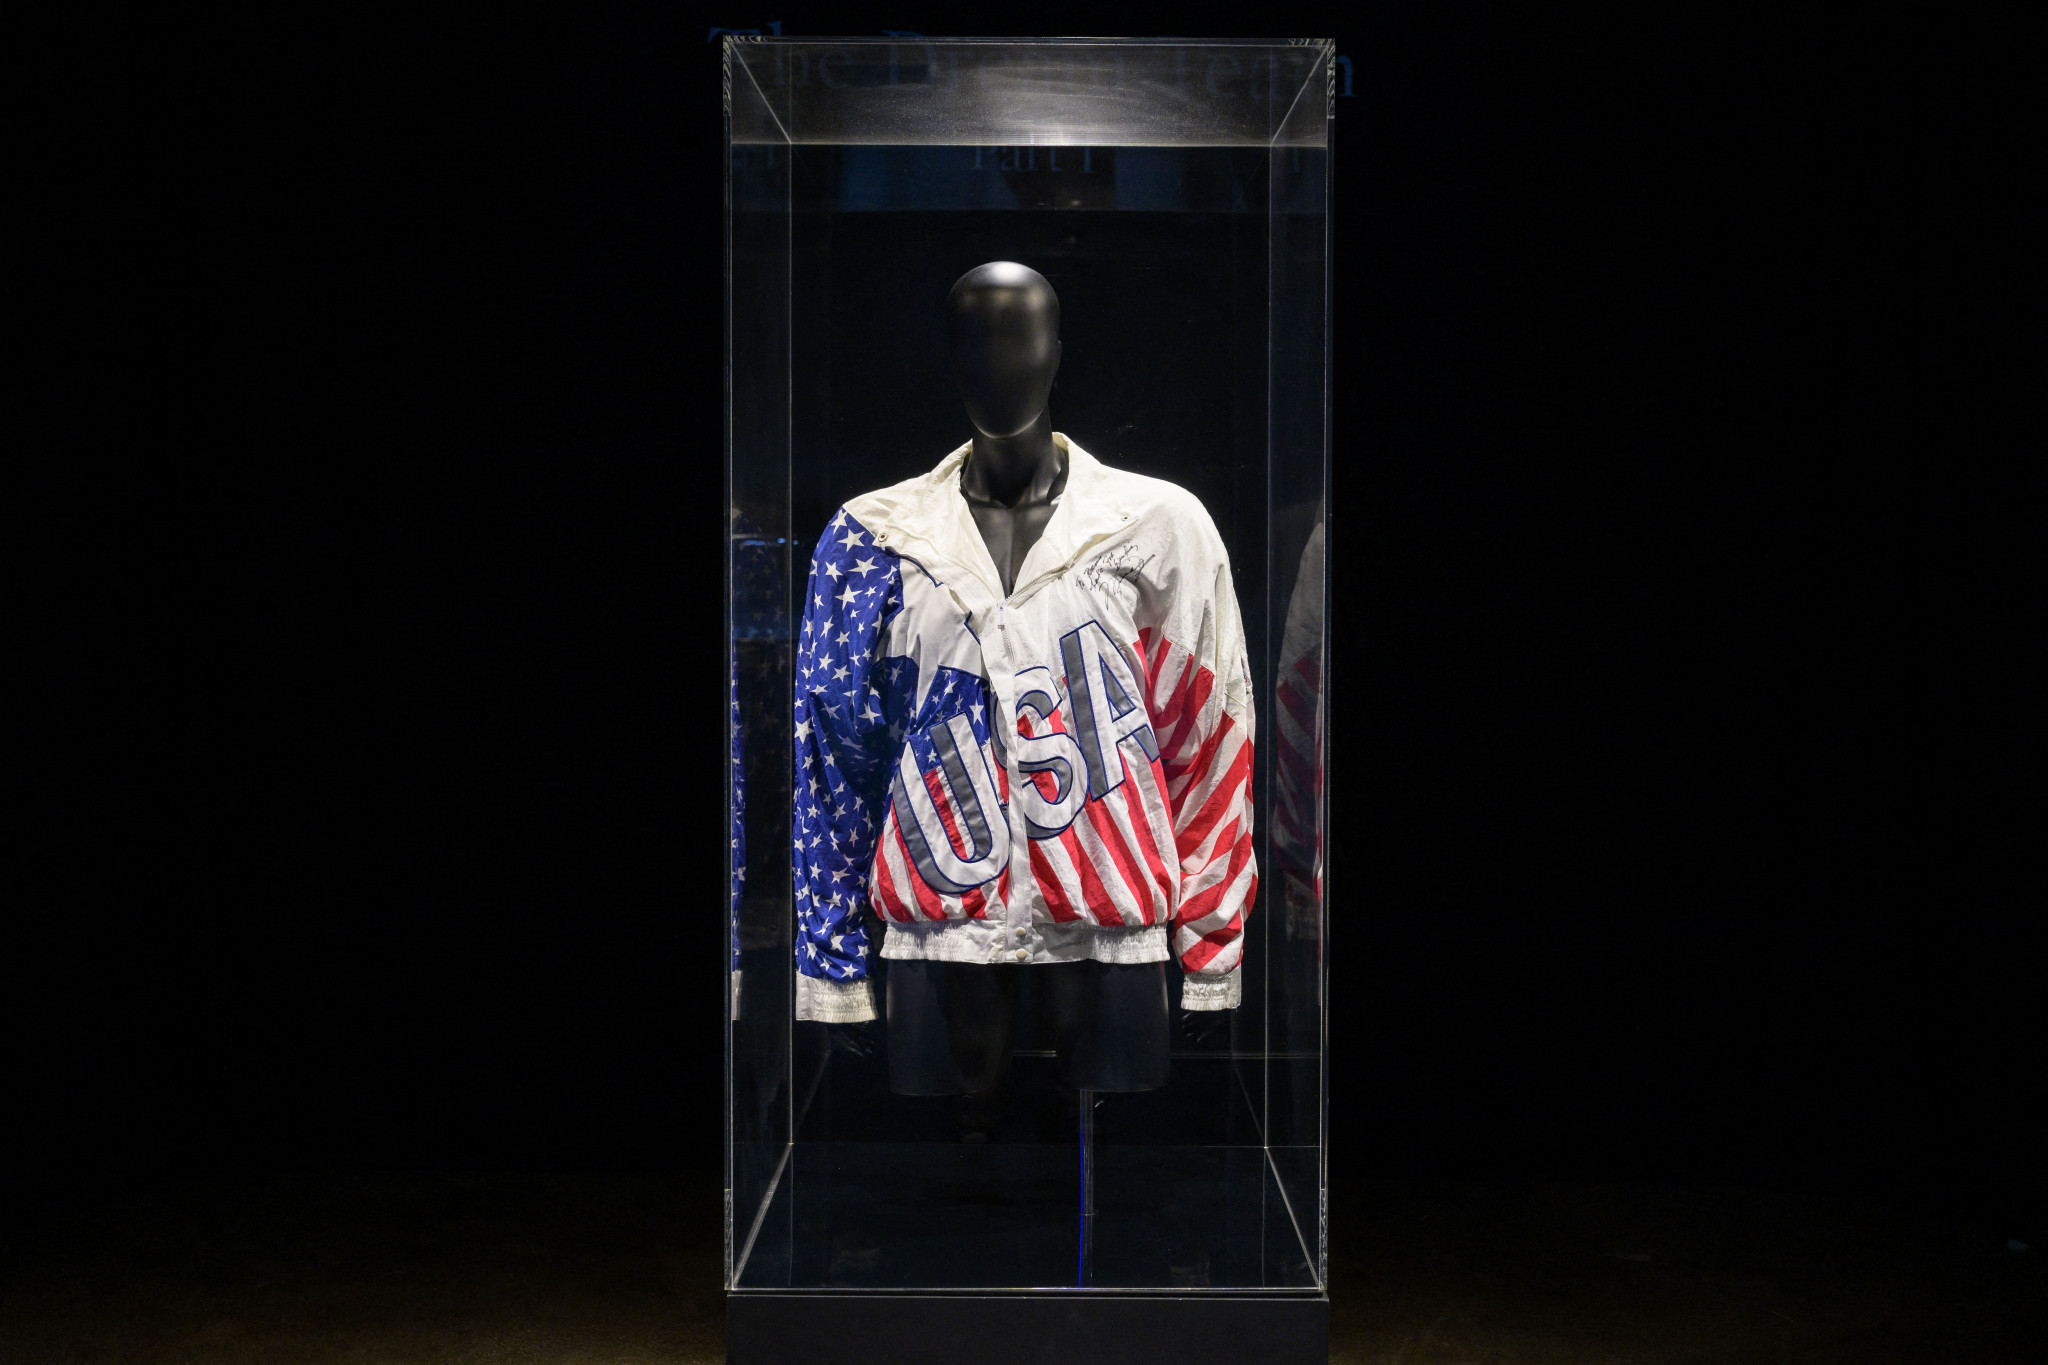 Michael Jordan wore the jacket when he collected his Olympic gold medal at Barcelona 1992 ©Getty Images